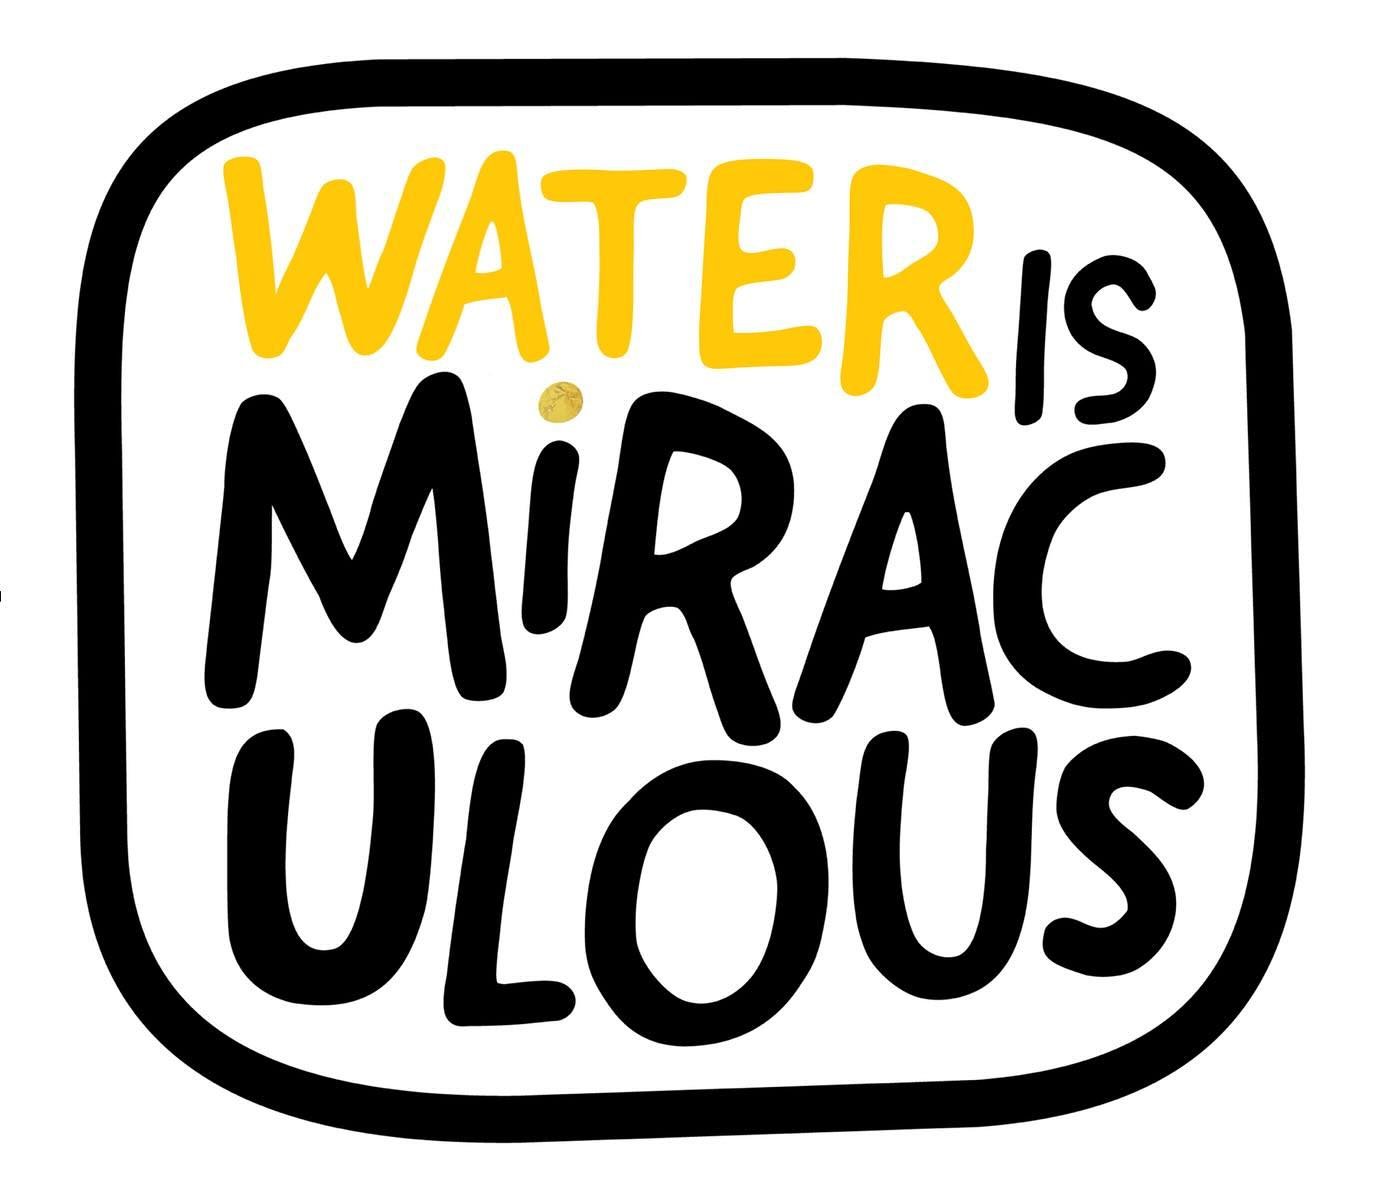 Couldn&rsquo;t be happier about having @charitywater as our partner for the Matter Is Miraculous show this Thursday. 

I have always admired the work @scottharrison and @vikharrison have done to tackle the mission of ending the water crisis. When we 